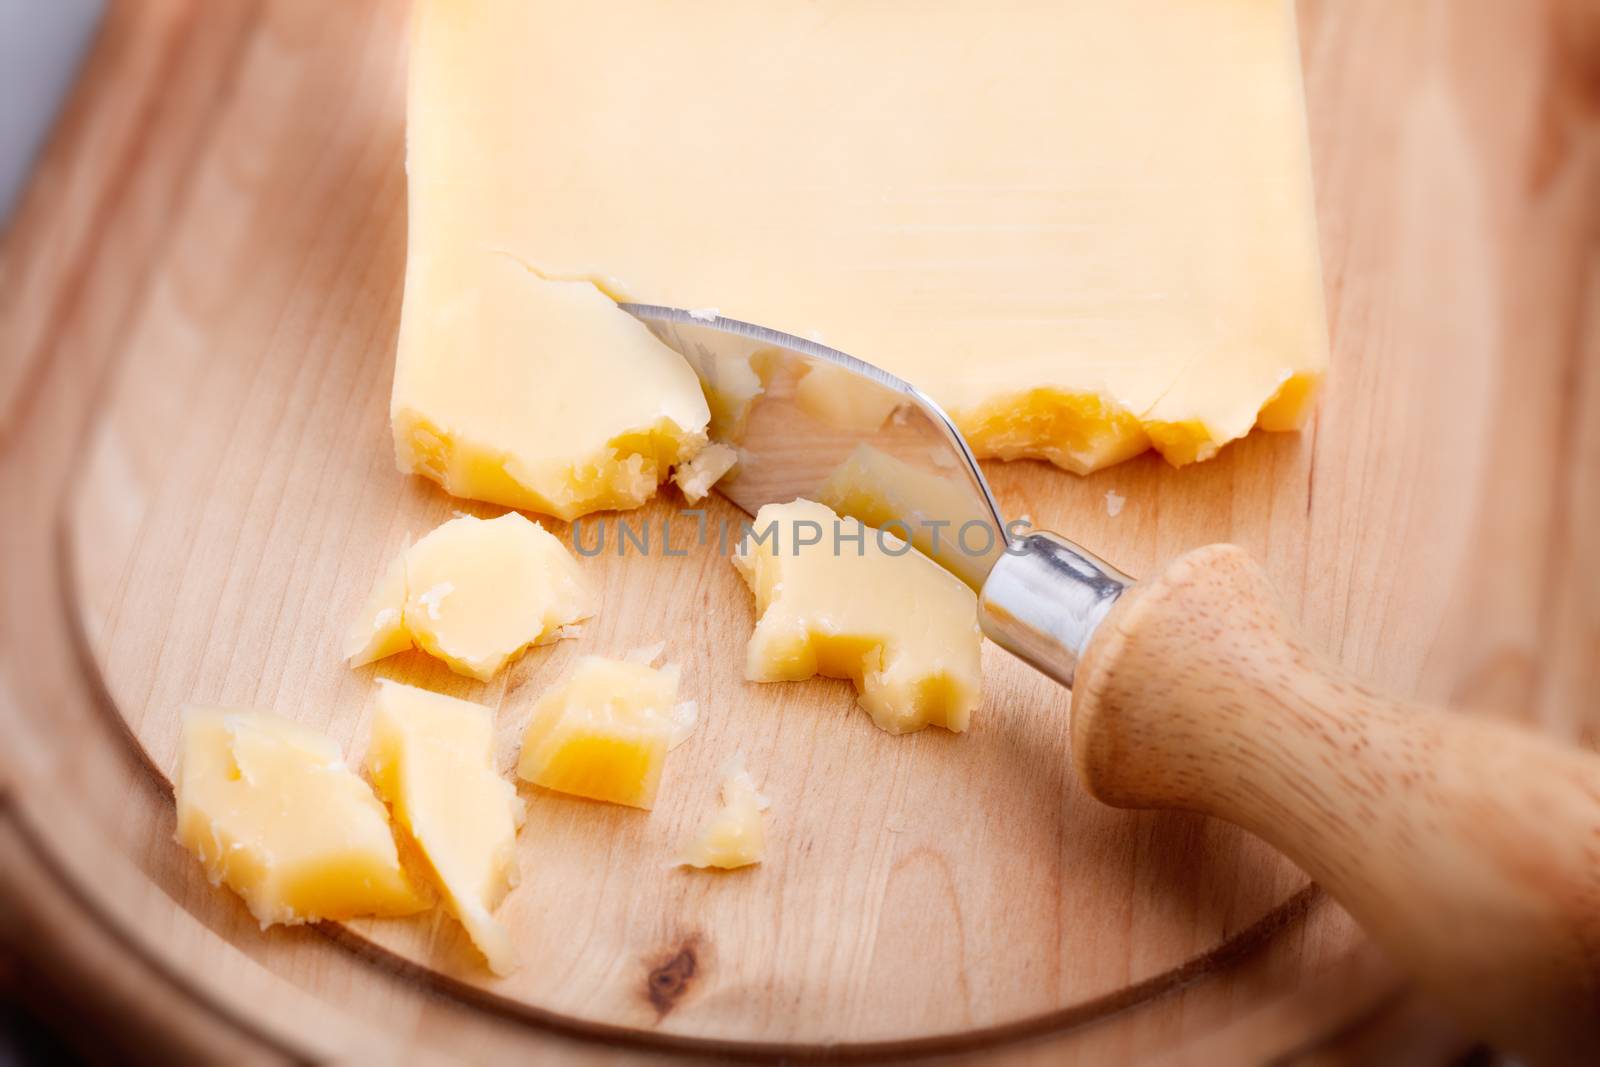 Parmesan cheese and knife by supercat67